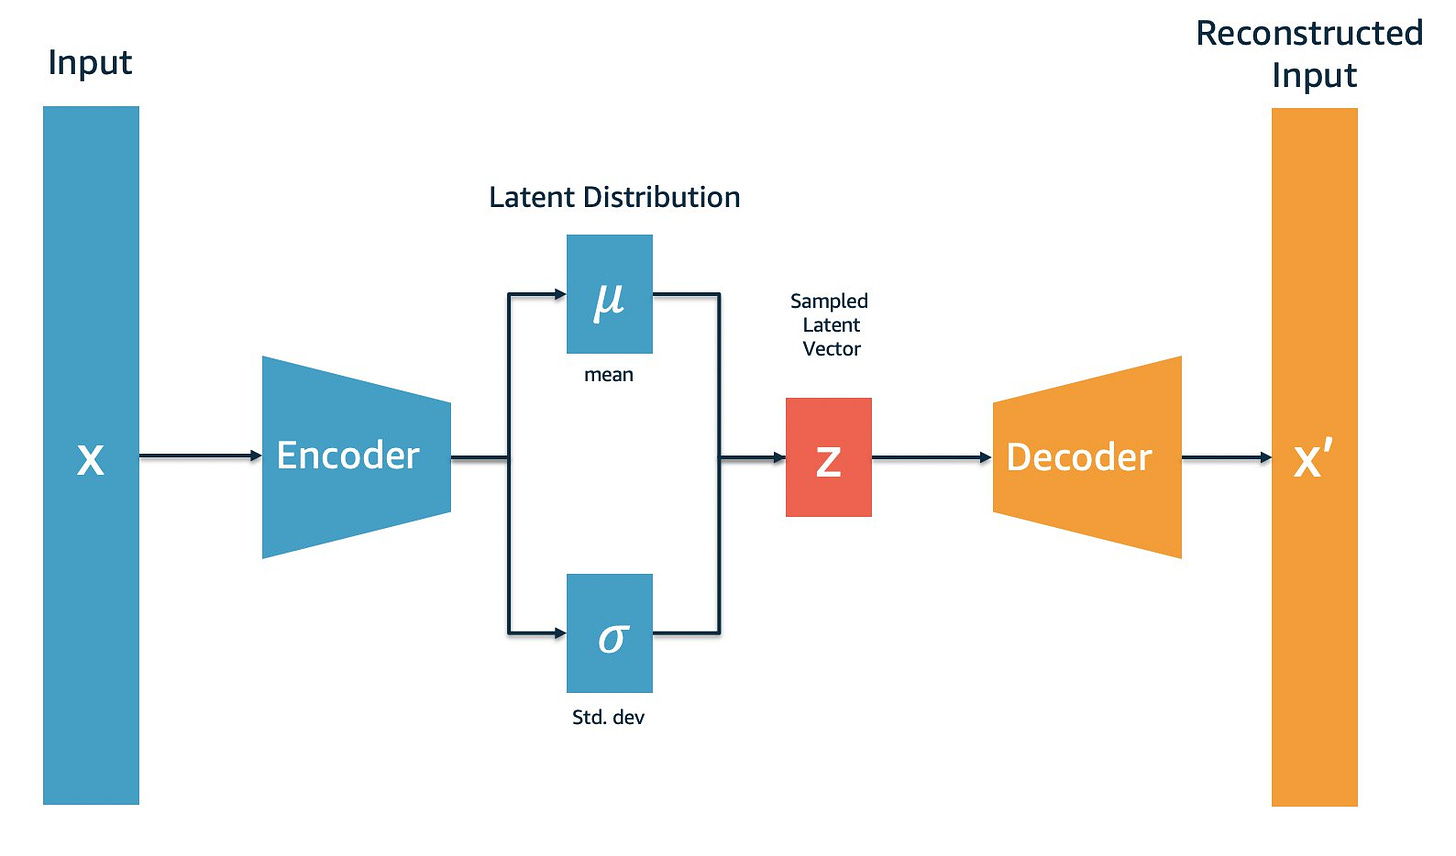 Deploy variational autoencoders for anomaly detection with TensorFlow  Serving on Amazon SageMaker | AWS Machine Learning Blog